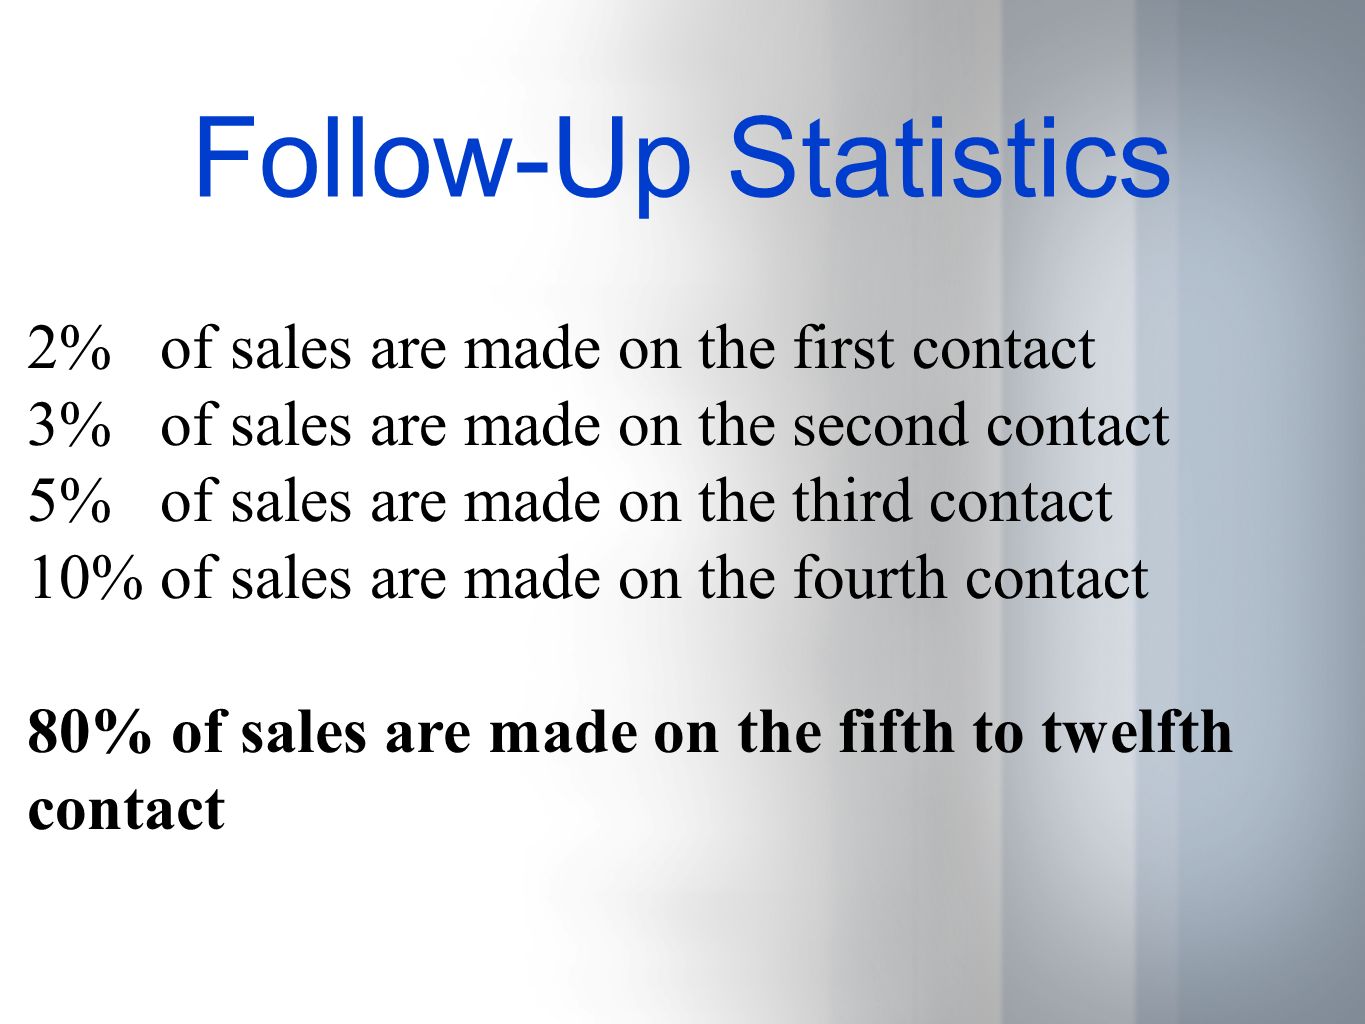 Follow-Up Statistics 2% of sales are made on the first contact 3% of sales are made on the second contact 5% of sales are made on the third contact 10% of sales are made on the fourth contact 80% of sales are made on the fifth to twelfth contact